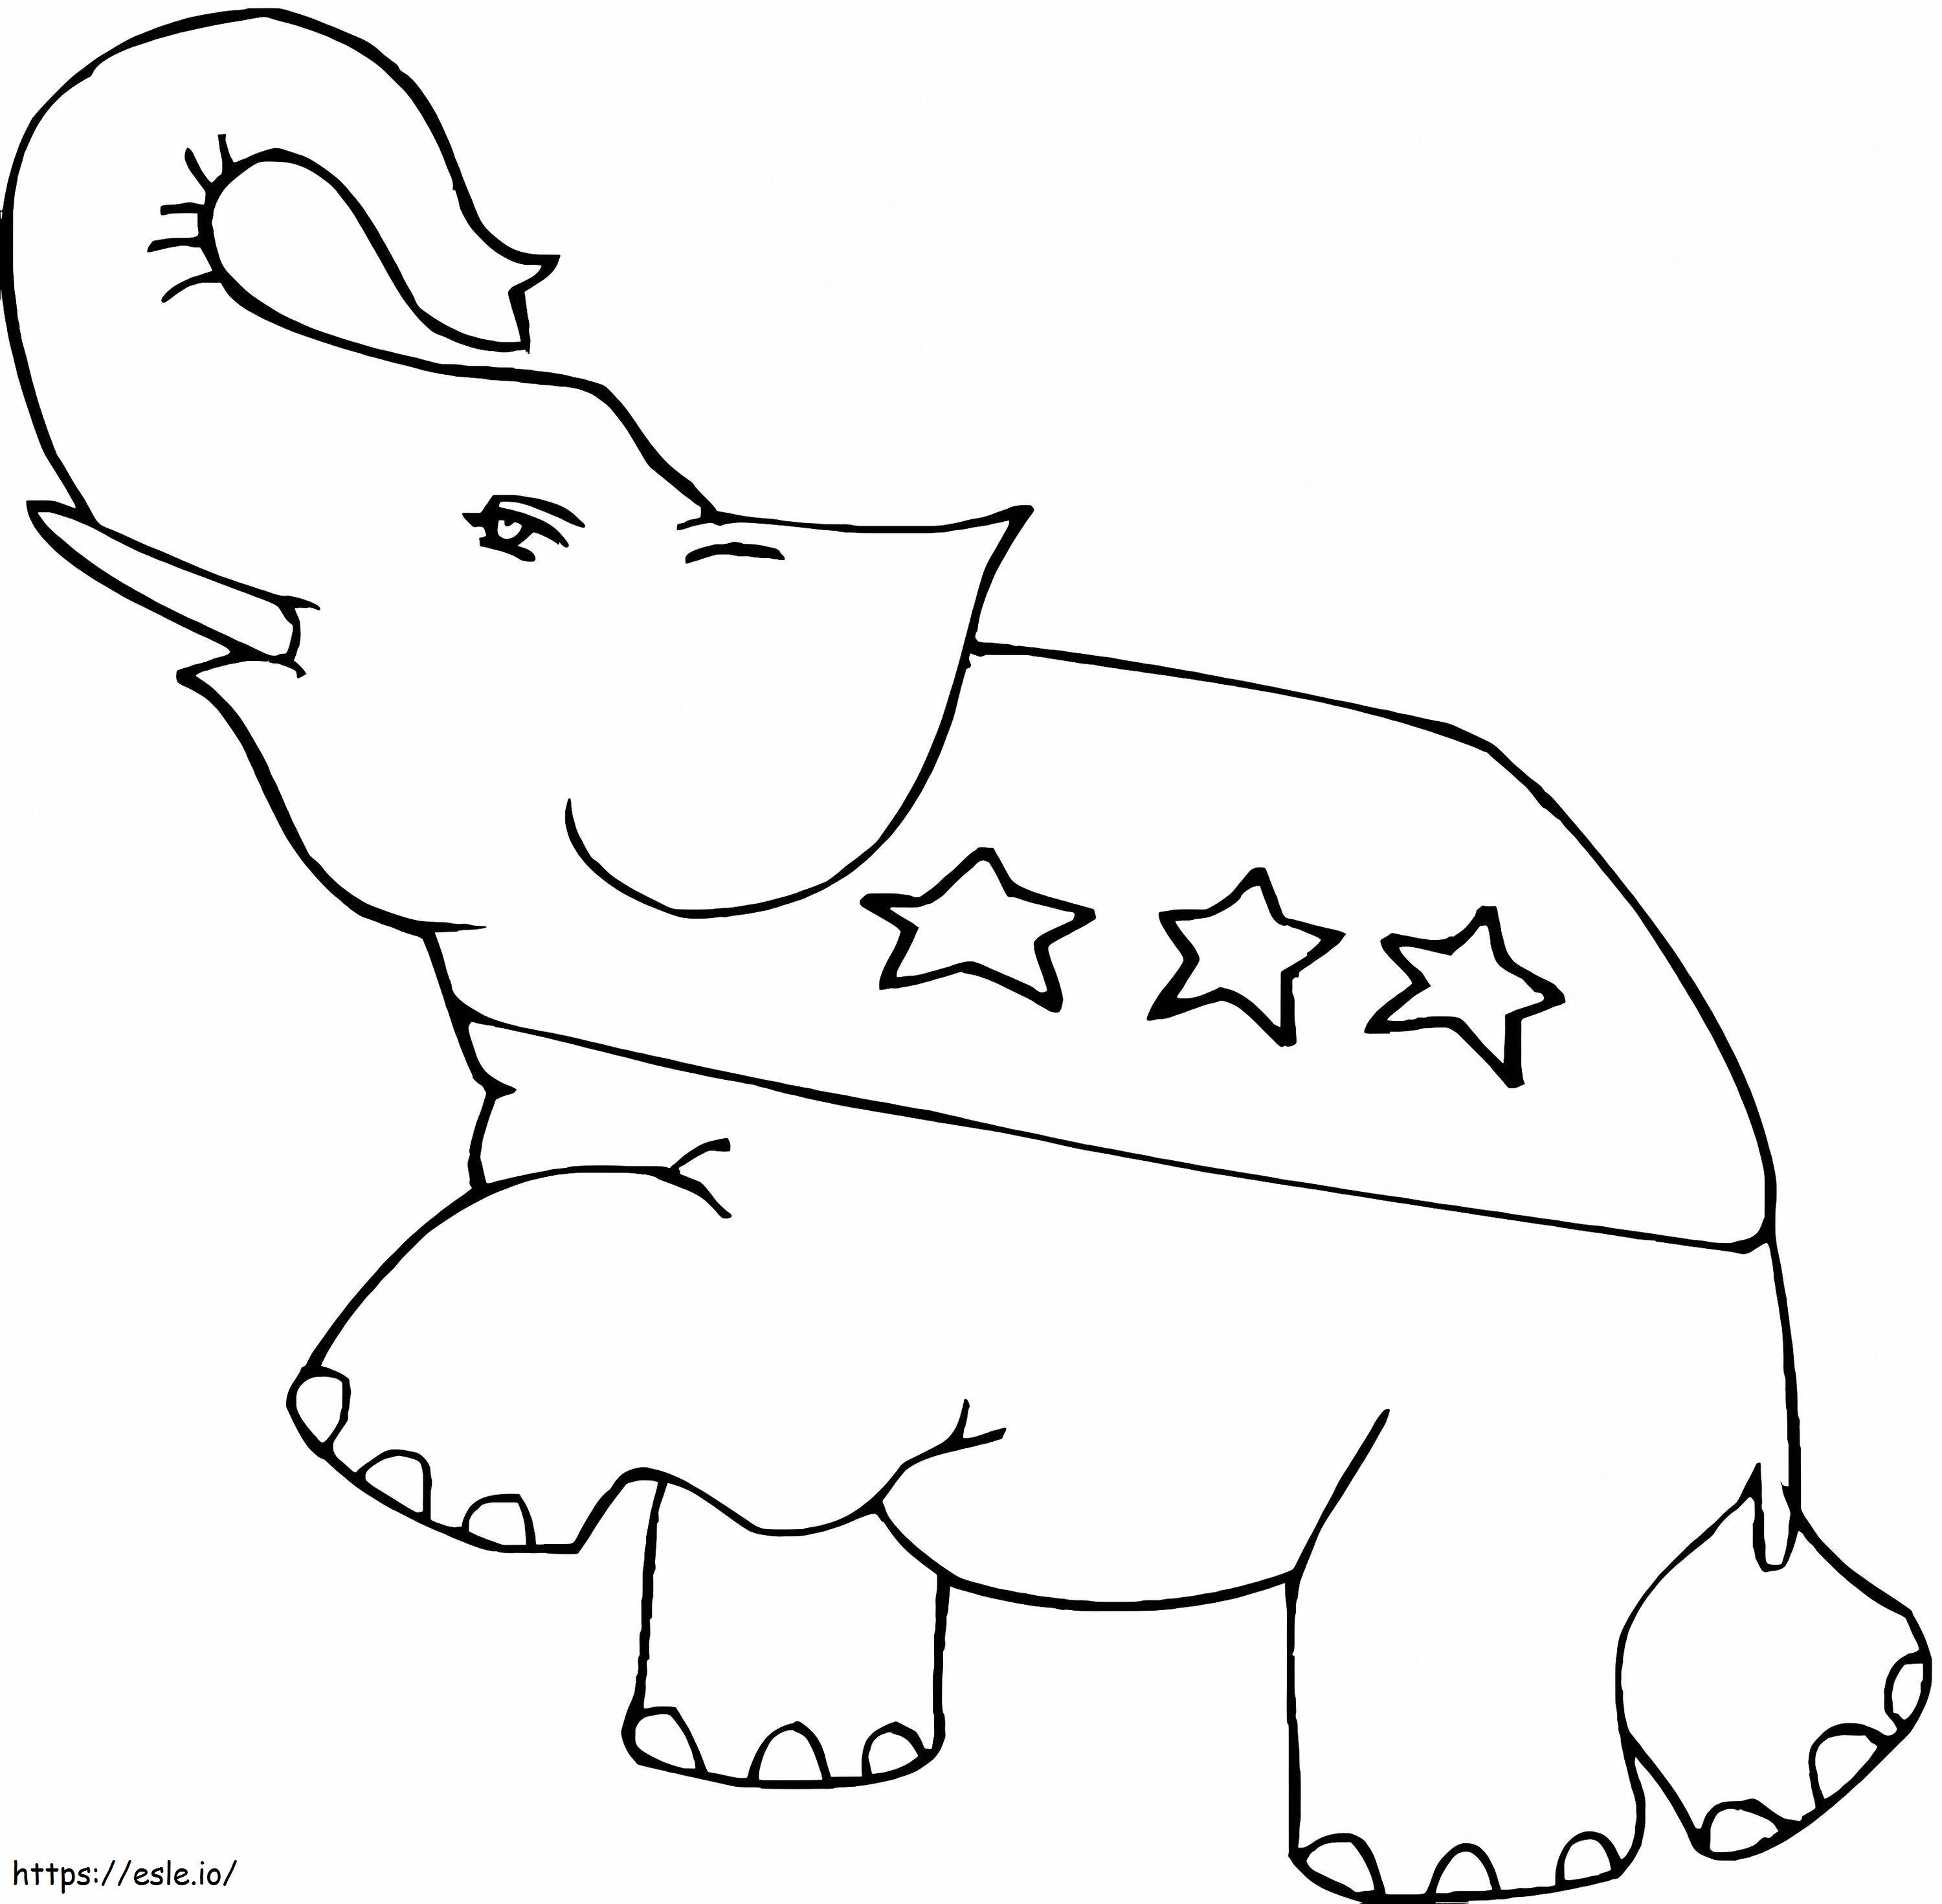 Republican Elephant 1 coloring page